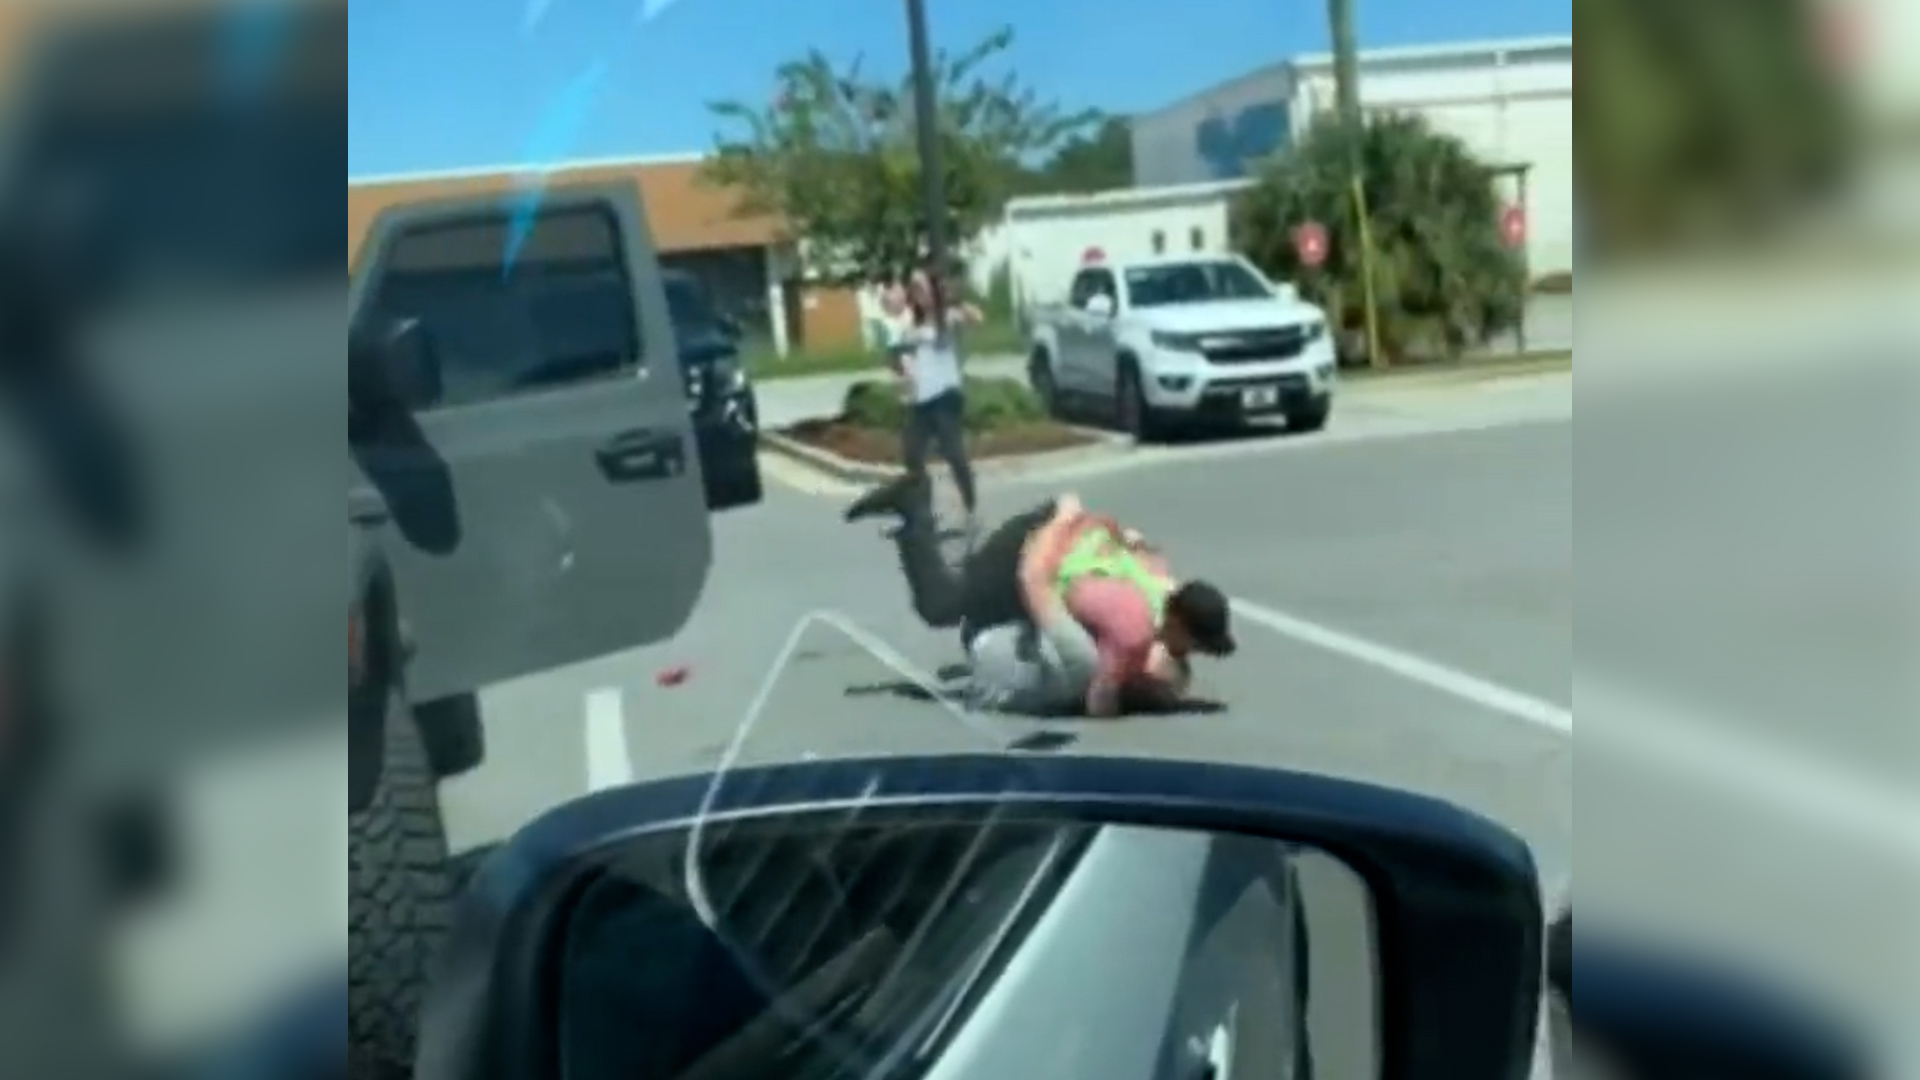 Video of the Day: Chick-fil-a worker tackles carjacker - The Daily Universe